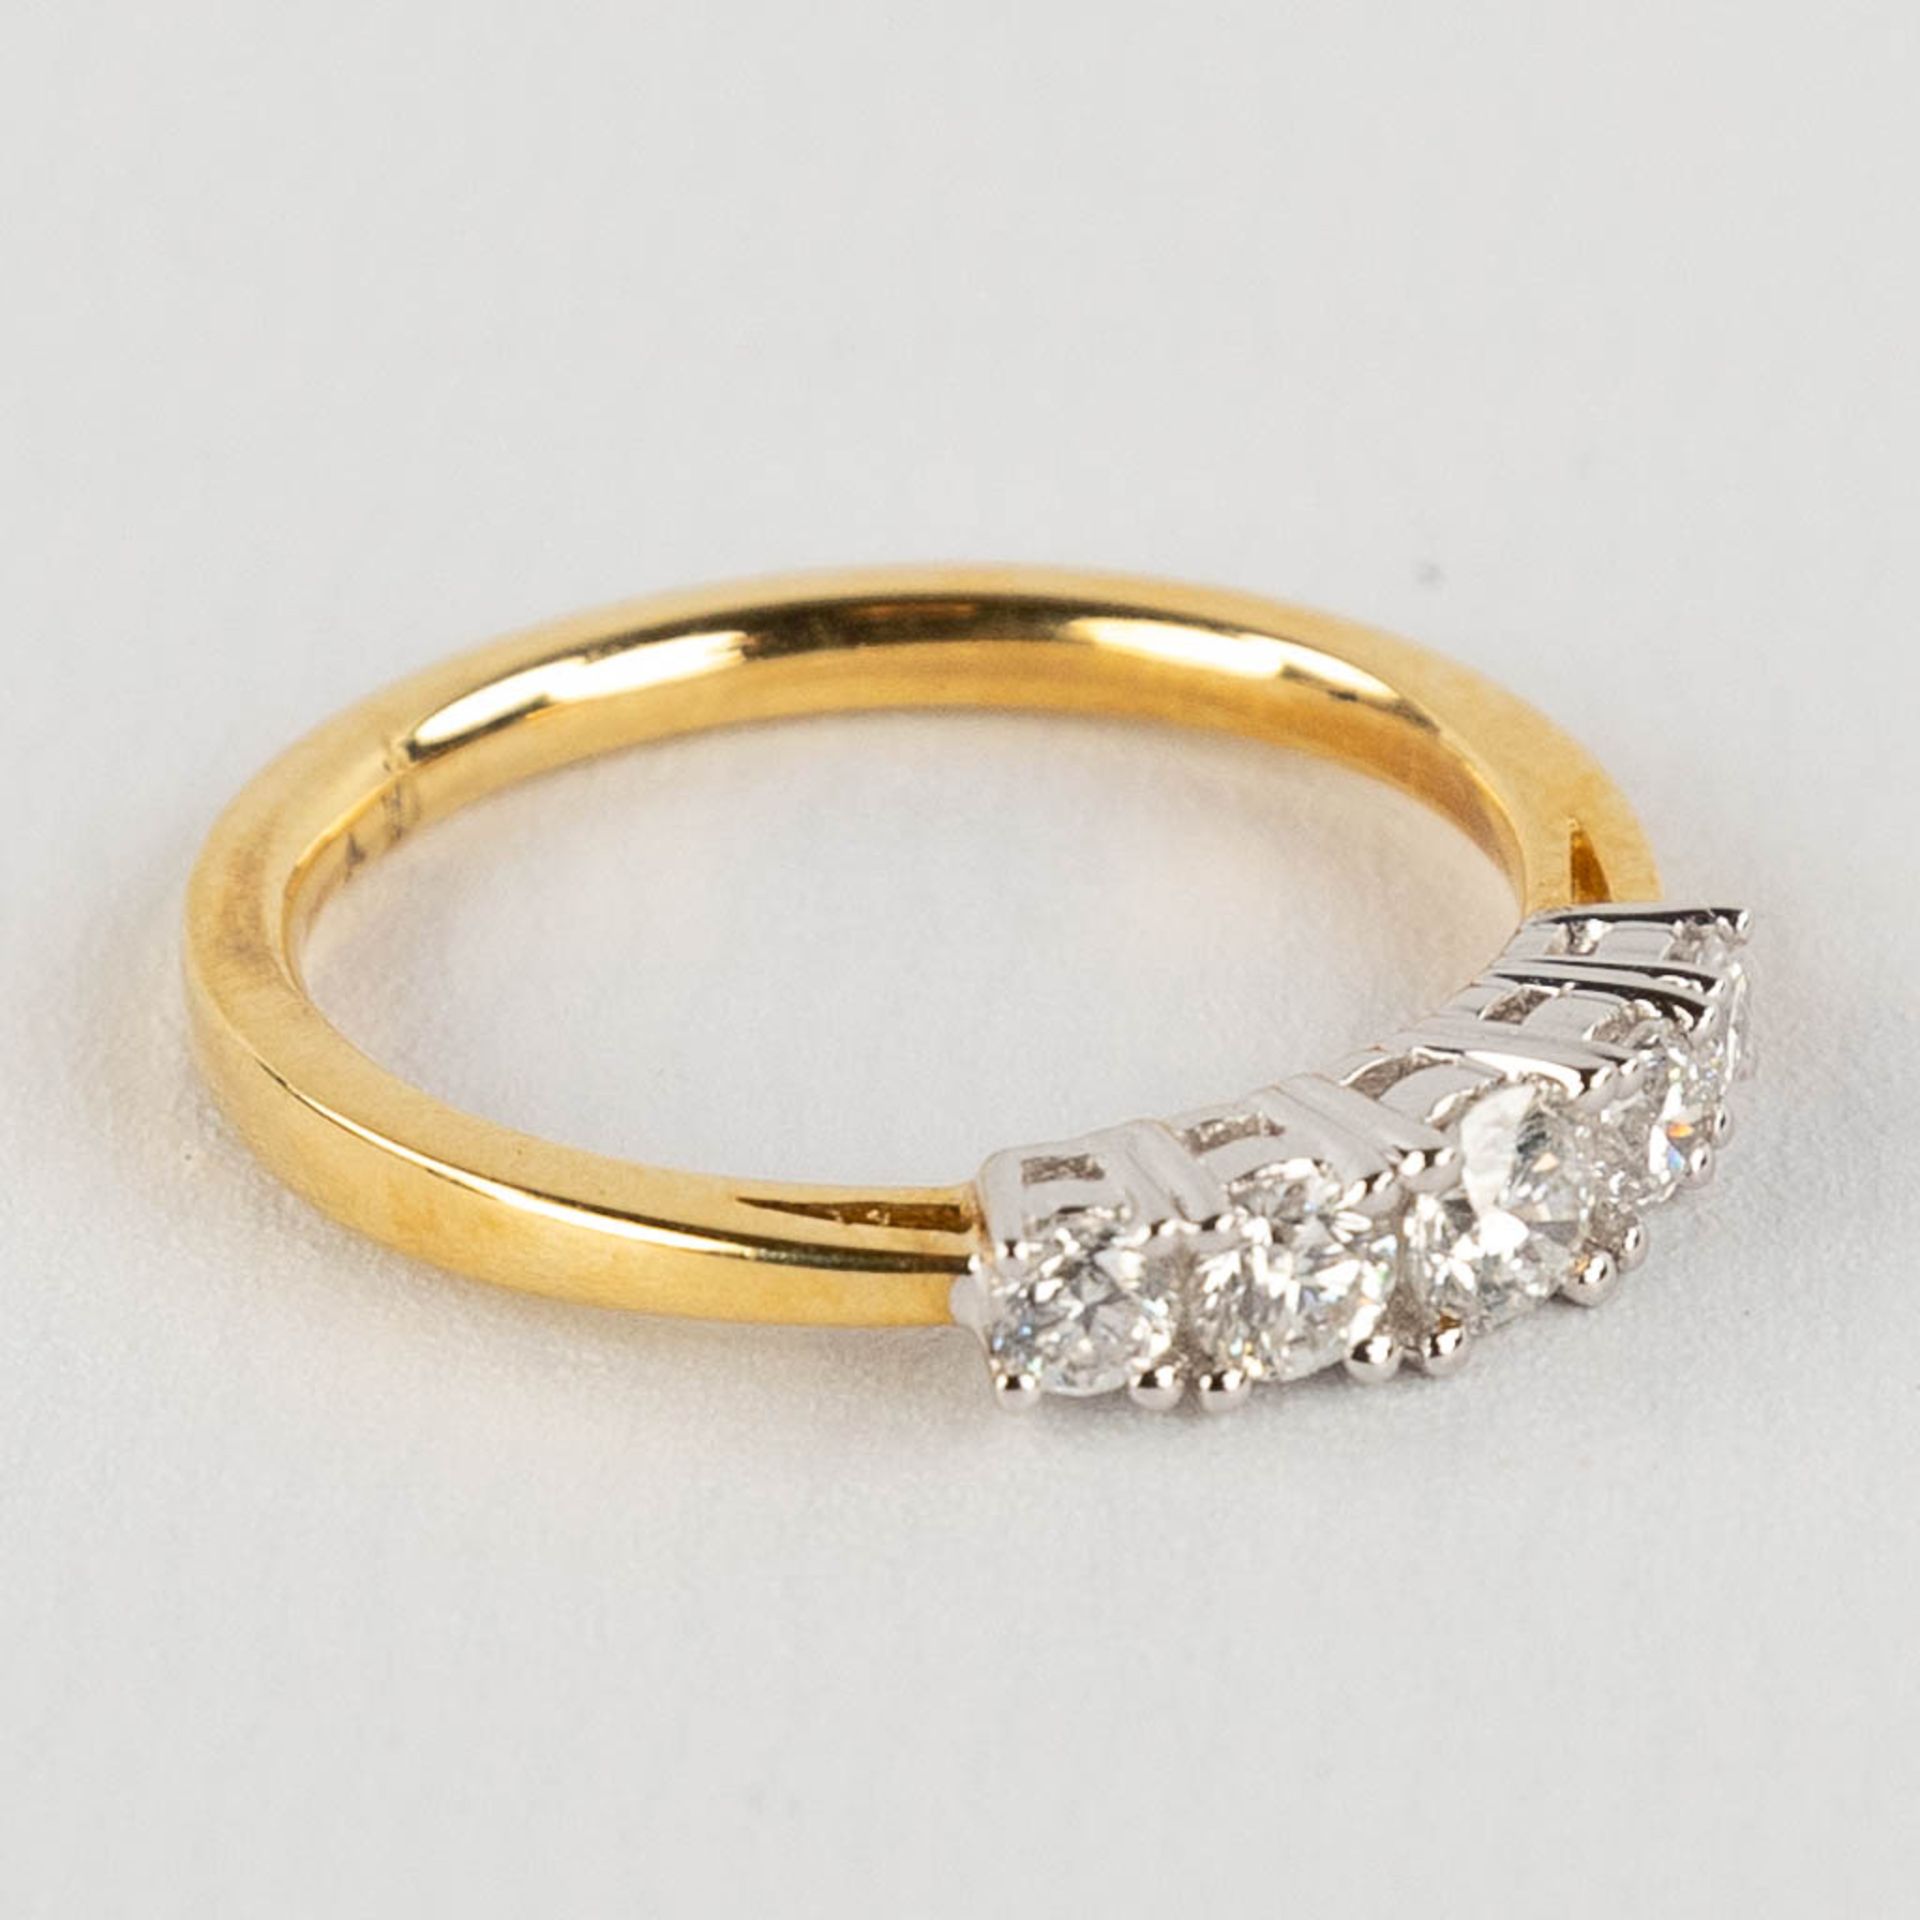 A ring, 18kt yellow and white gold with 5 diamonds, appr. 0,52ct. Ring size 54. - Image 3 of 11